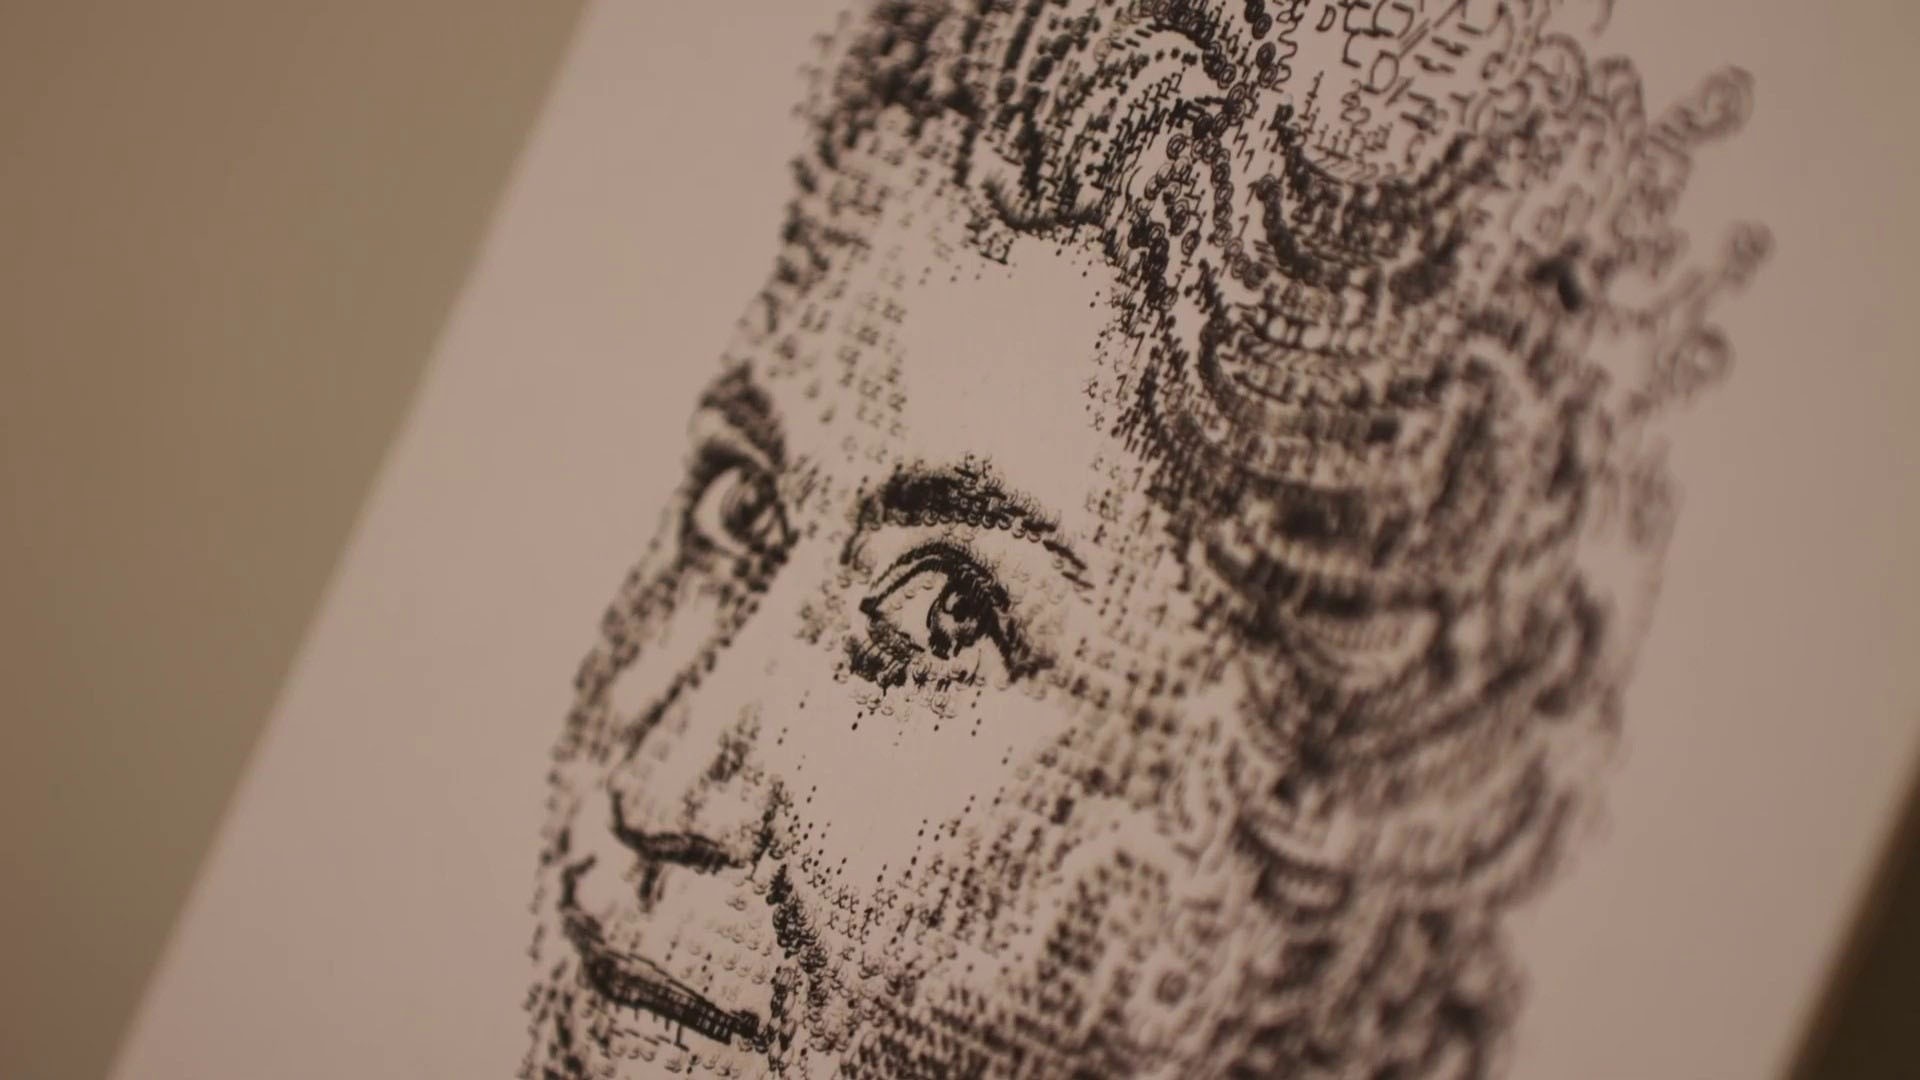 James Cook Artwork – James Cook is an artist that draws portraits using a  typewriter.